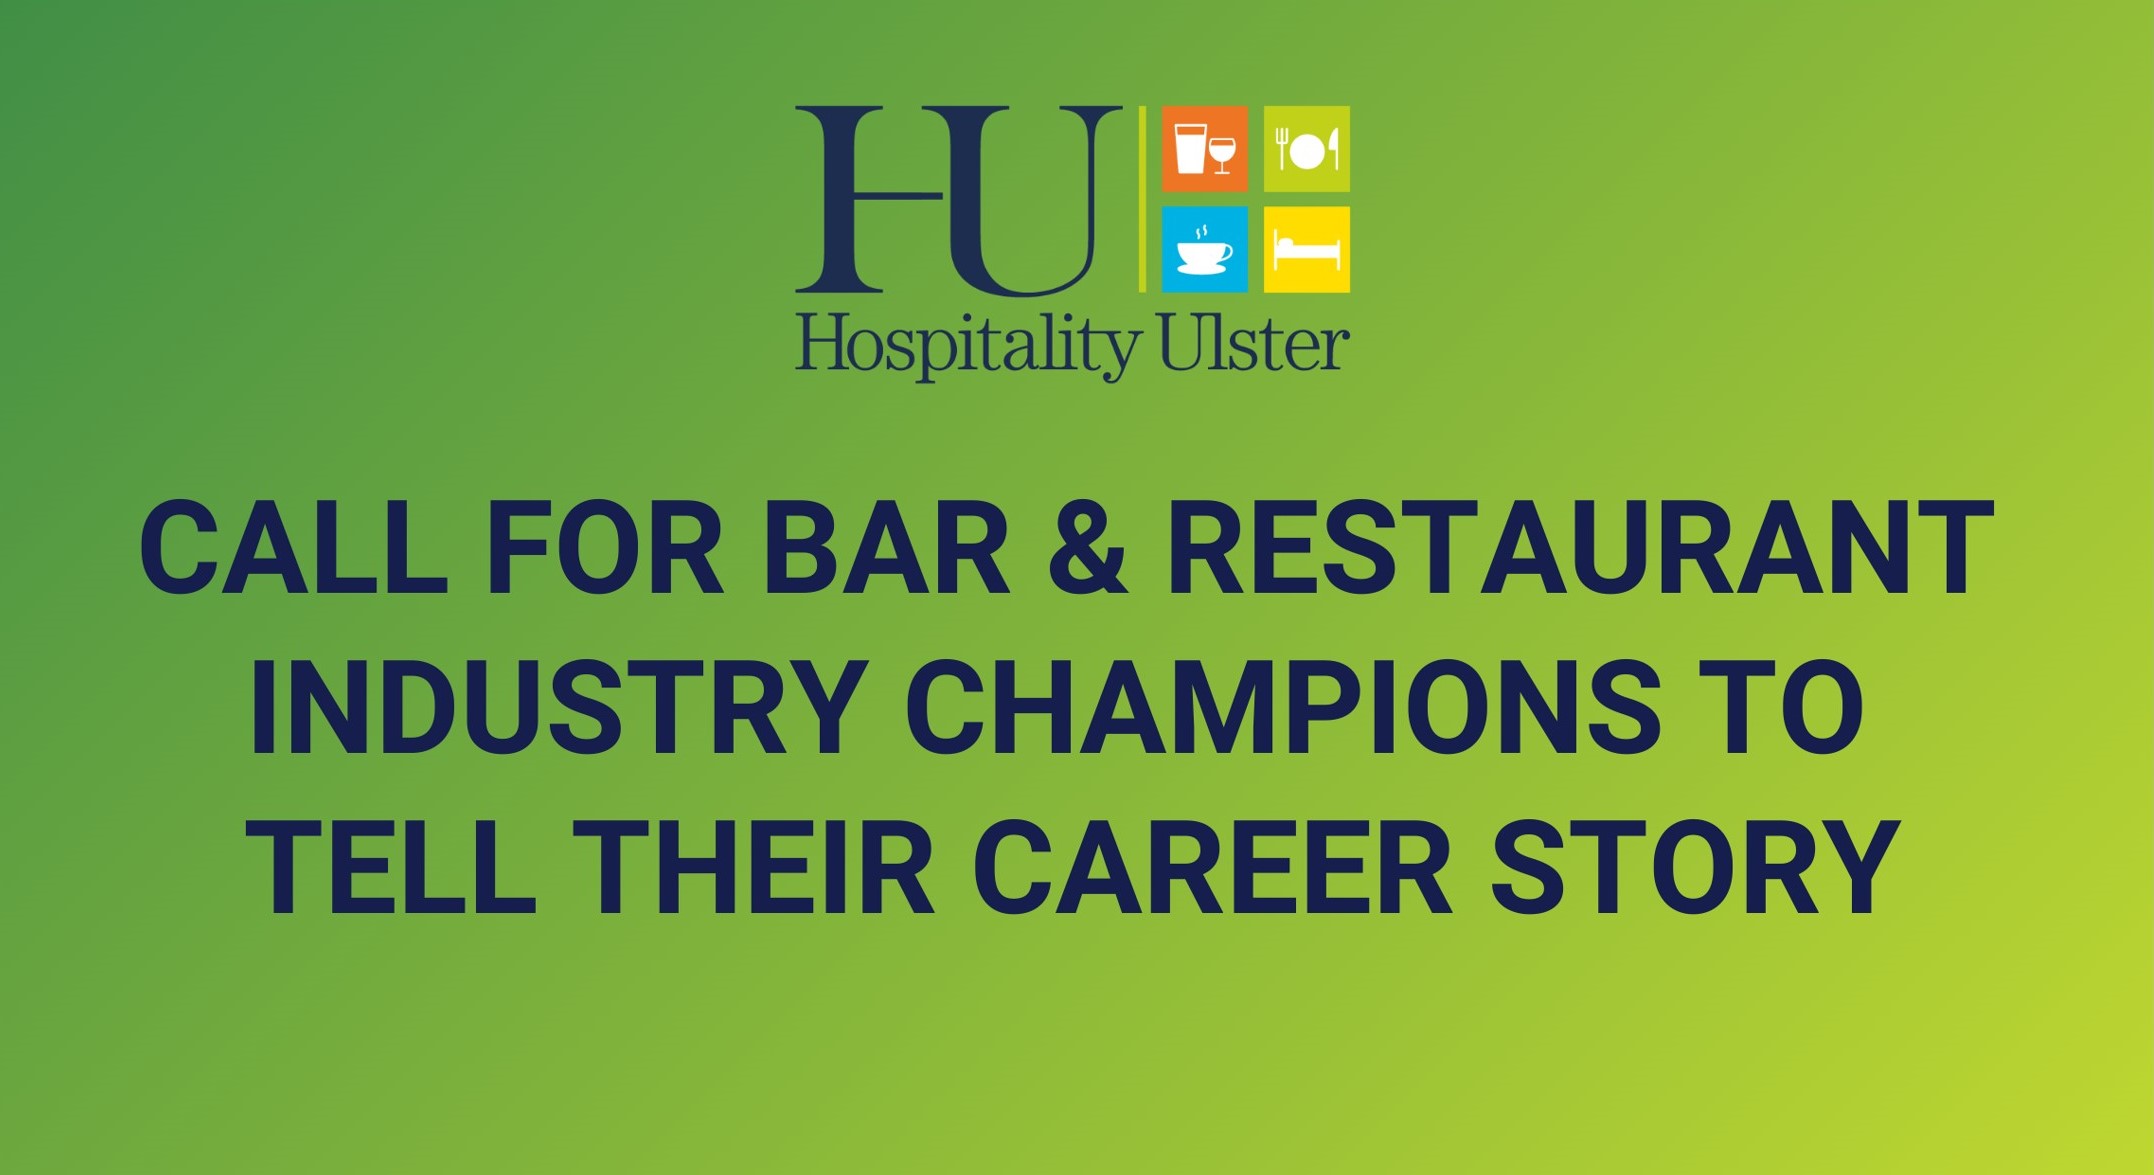 CALL FOR BAR AND RESTAURANT INDUSTRY CHAMPIONS TO TELL THEIR CAREER STORY